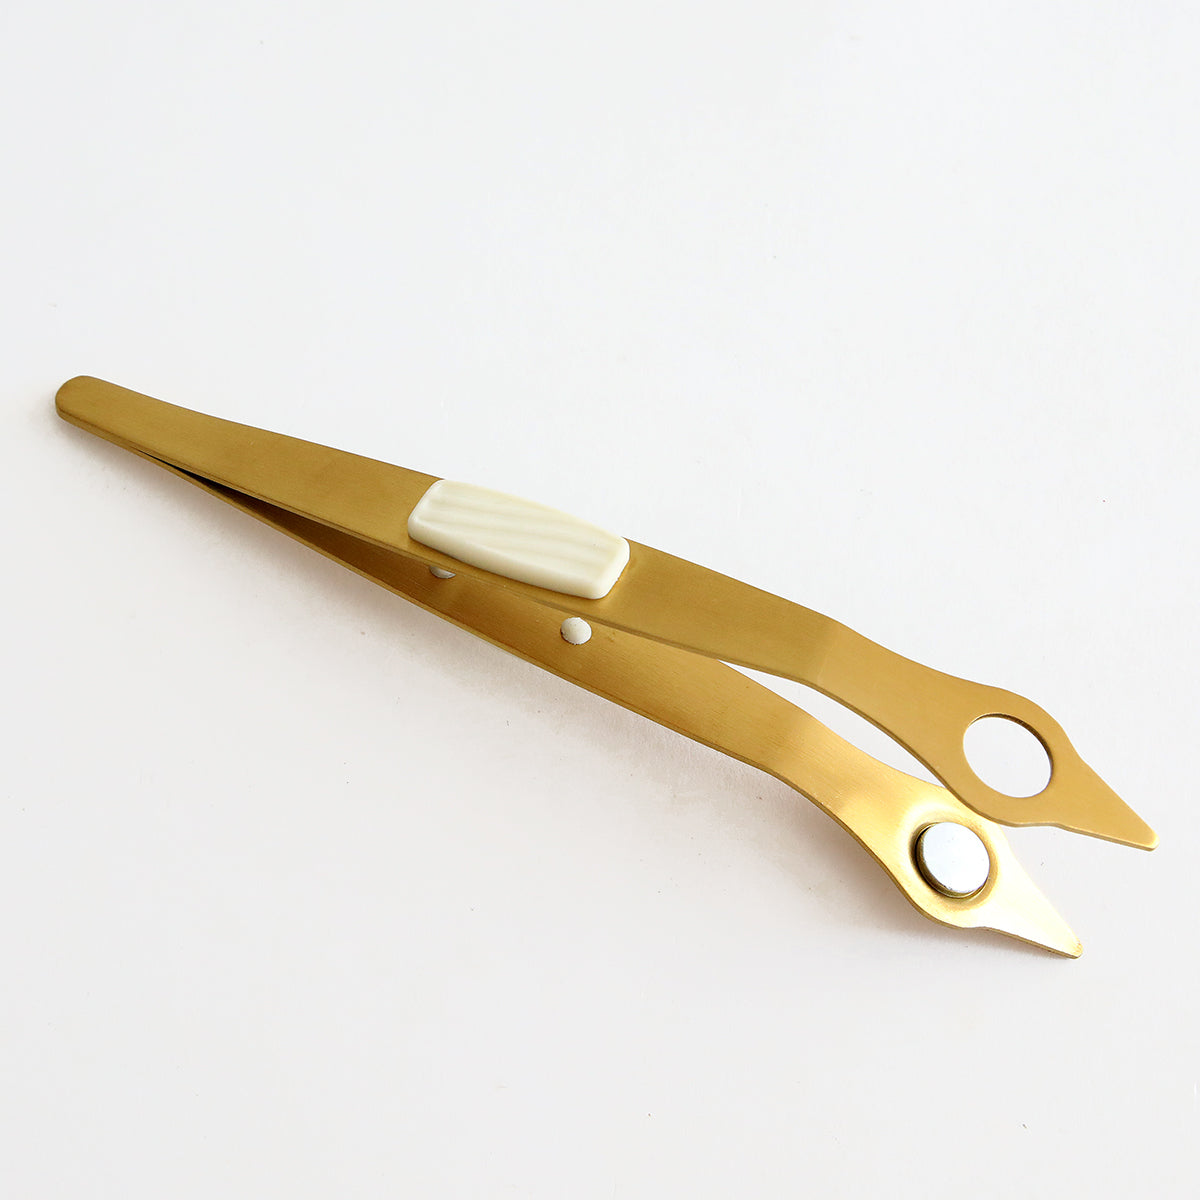 A pair of Magnetic Tweezers on a clean white surface.